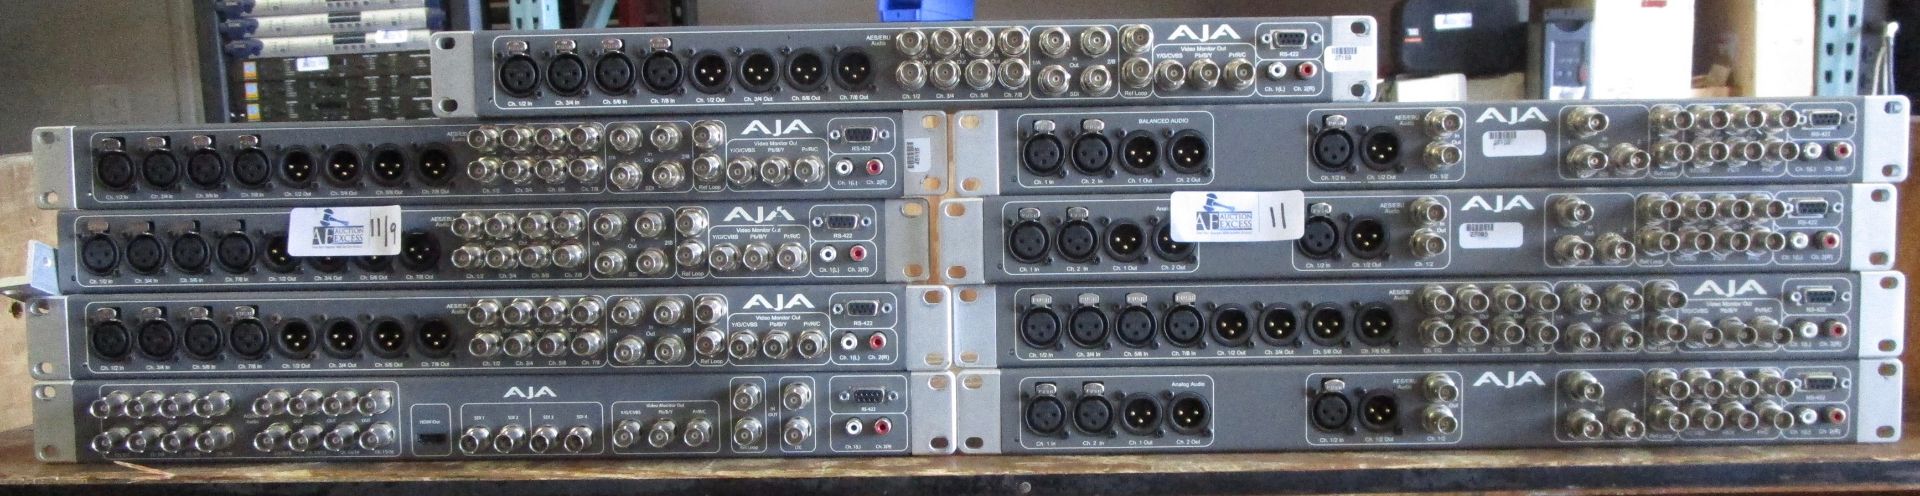 LOT OF 9 AJA BREAKOUT PANELS - Image 2 of 2